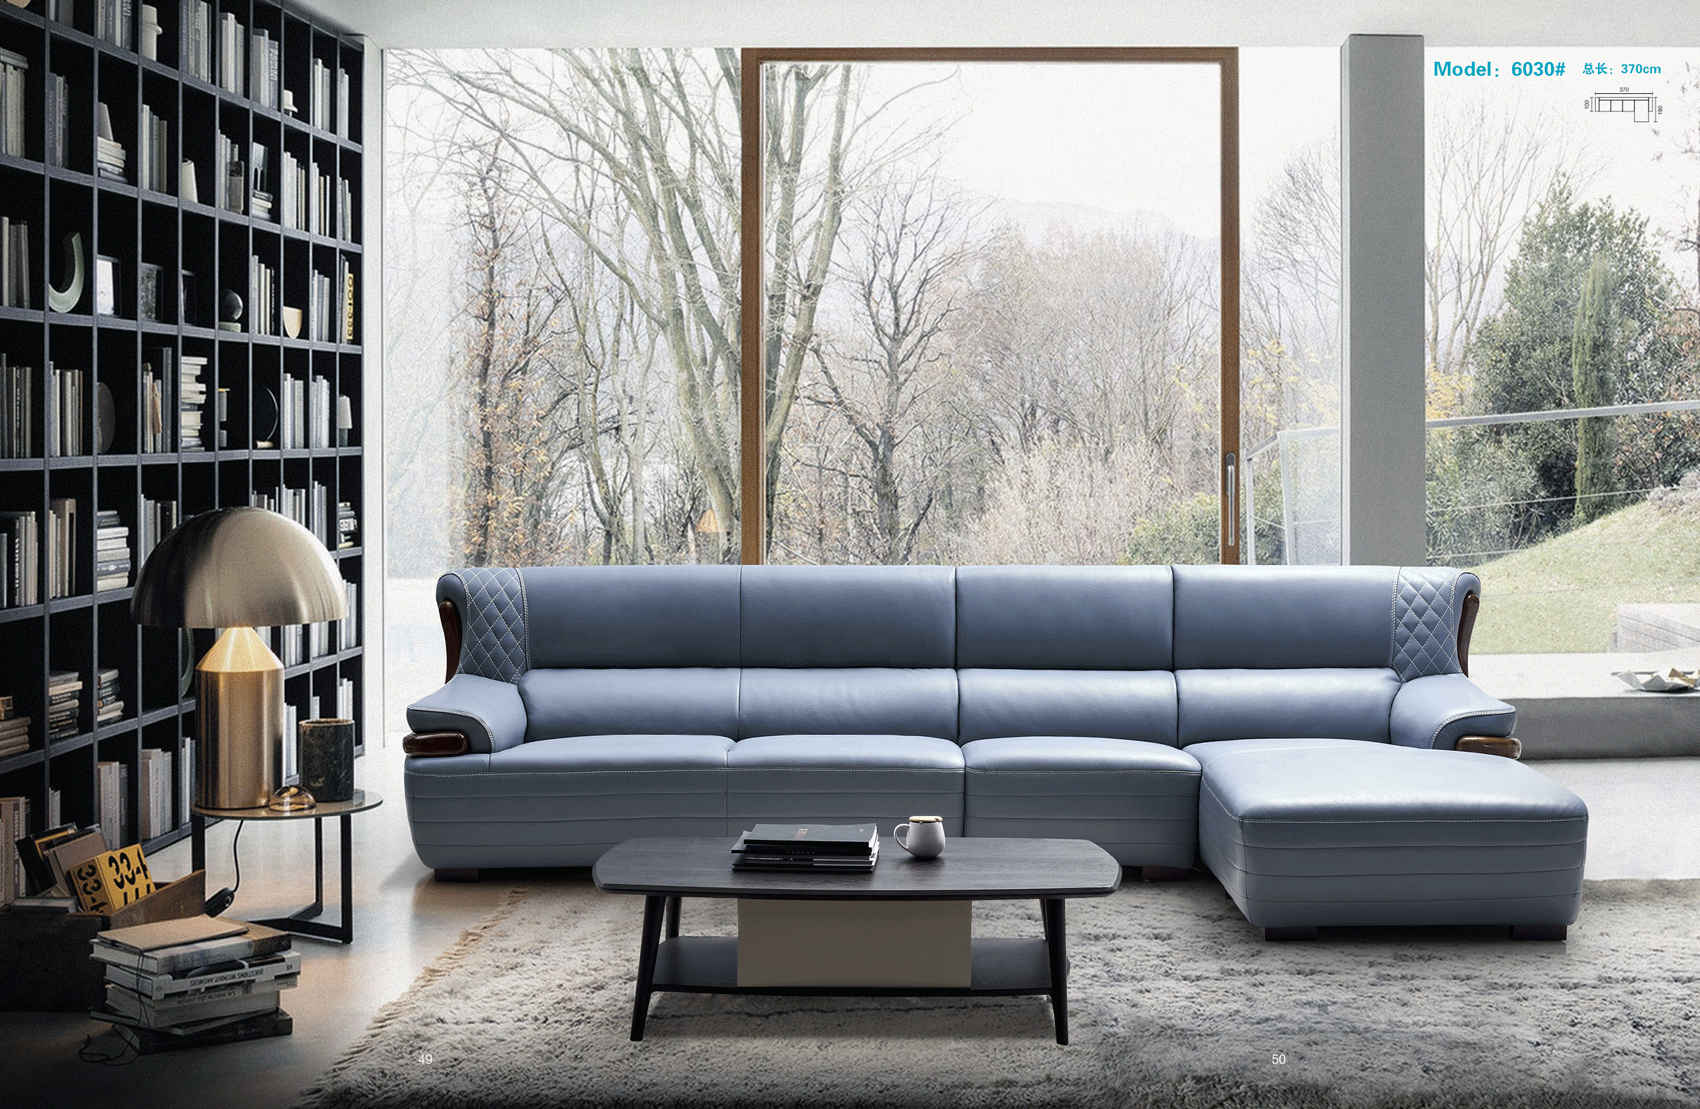 Clearance Living Room 6030 Sectional